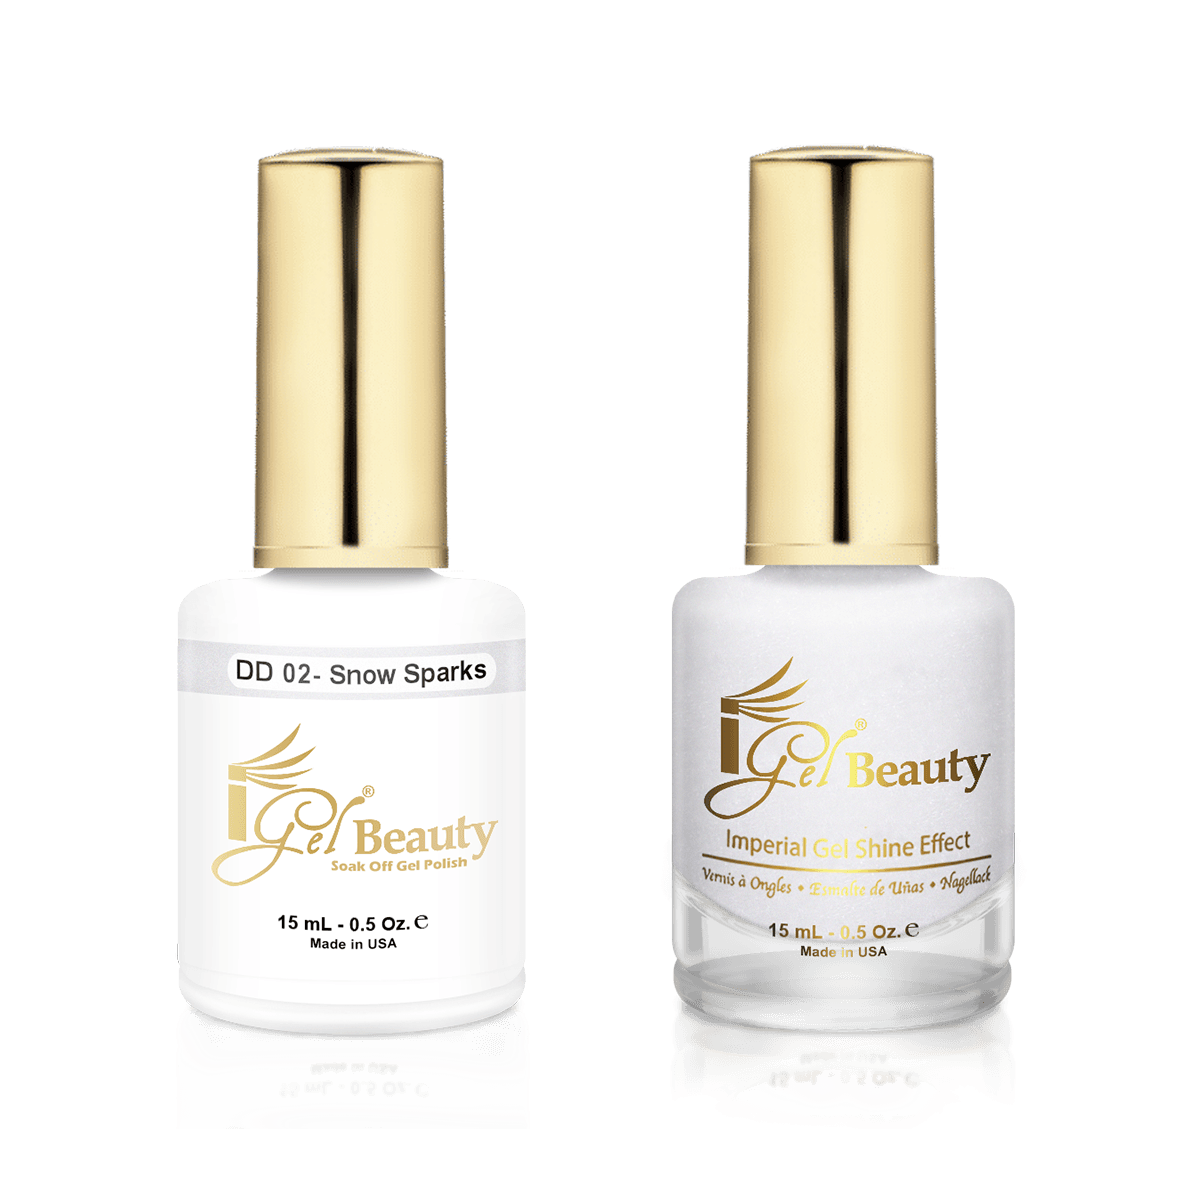 IGel Duo Gel Polish + Matching Nail Lacquer DD 02 SNOW SPARKS